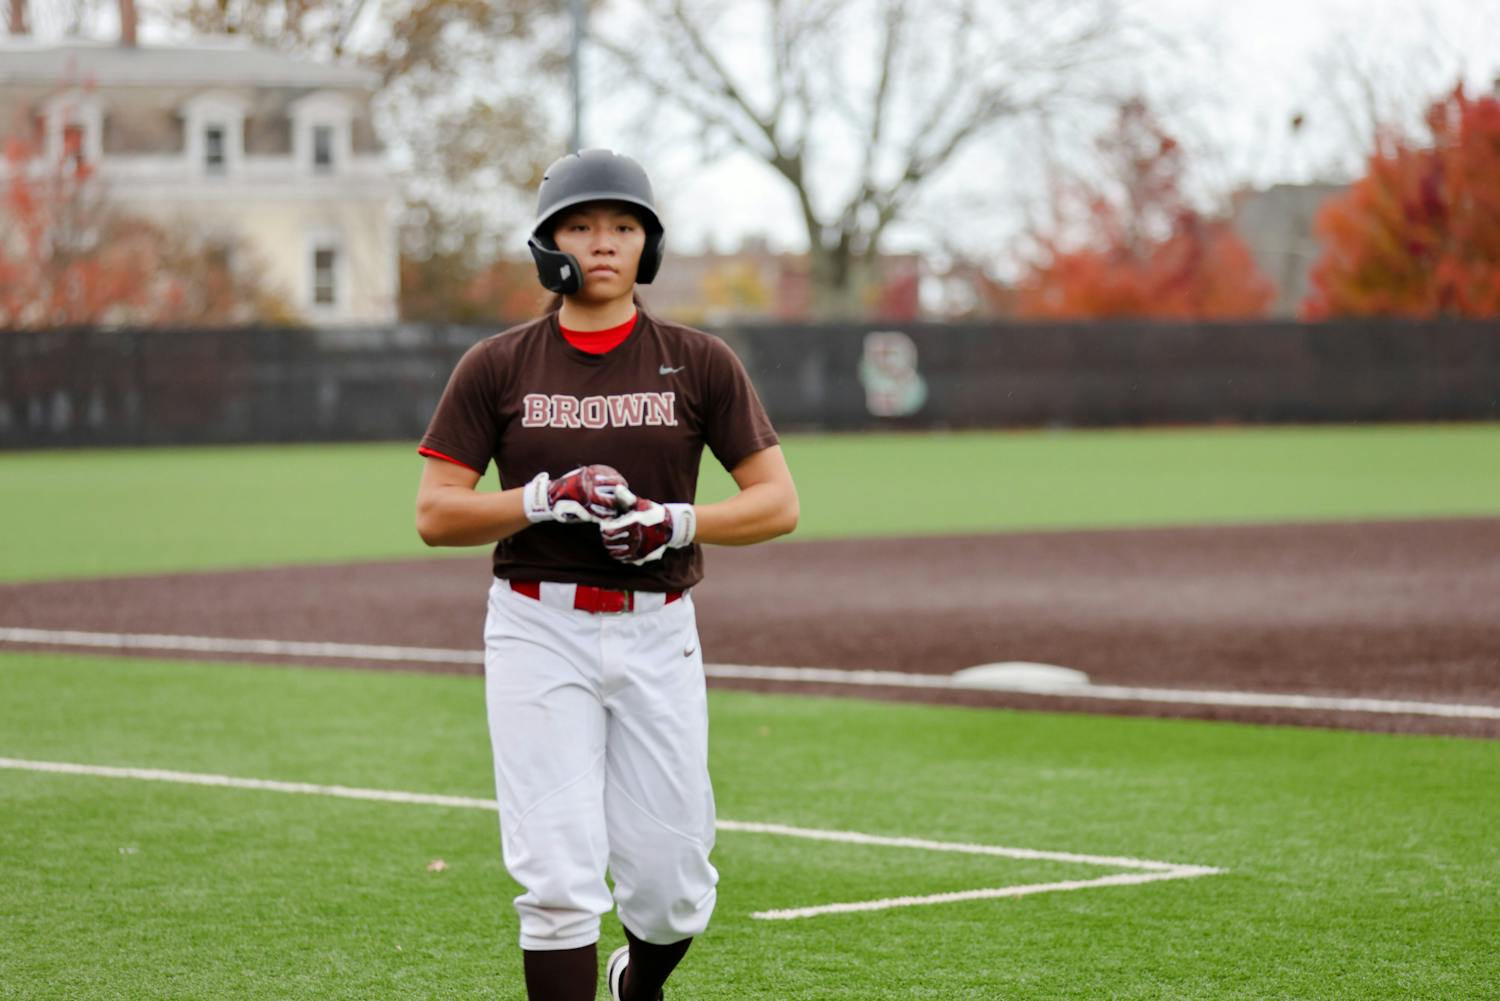 Girls know that they can dream bigger': How Olivia Pichardo '26 became  first woman to make Division I baseball team - The Brown Daily Herald